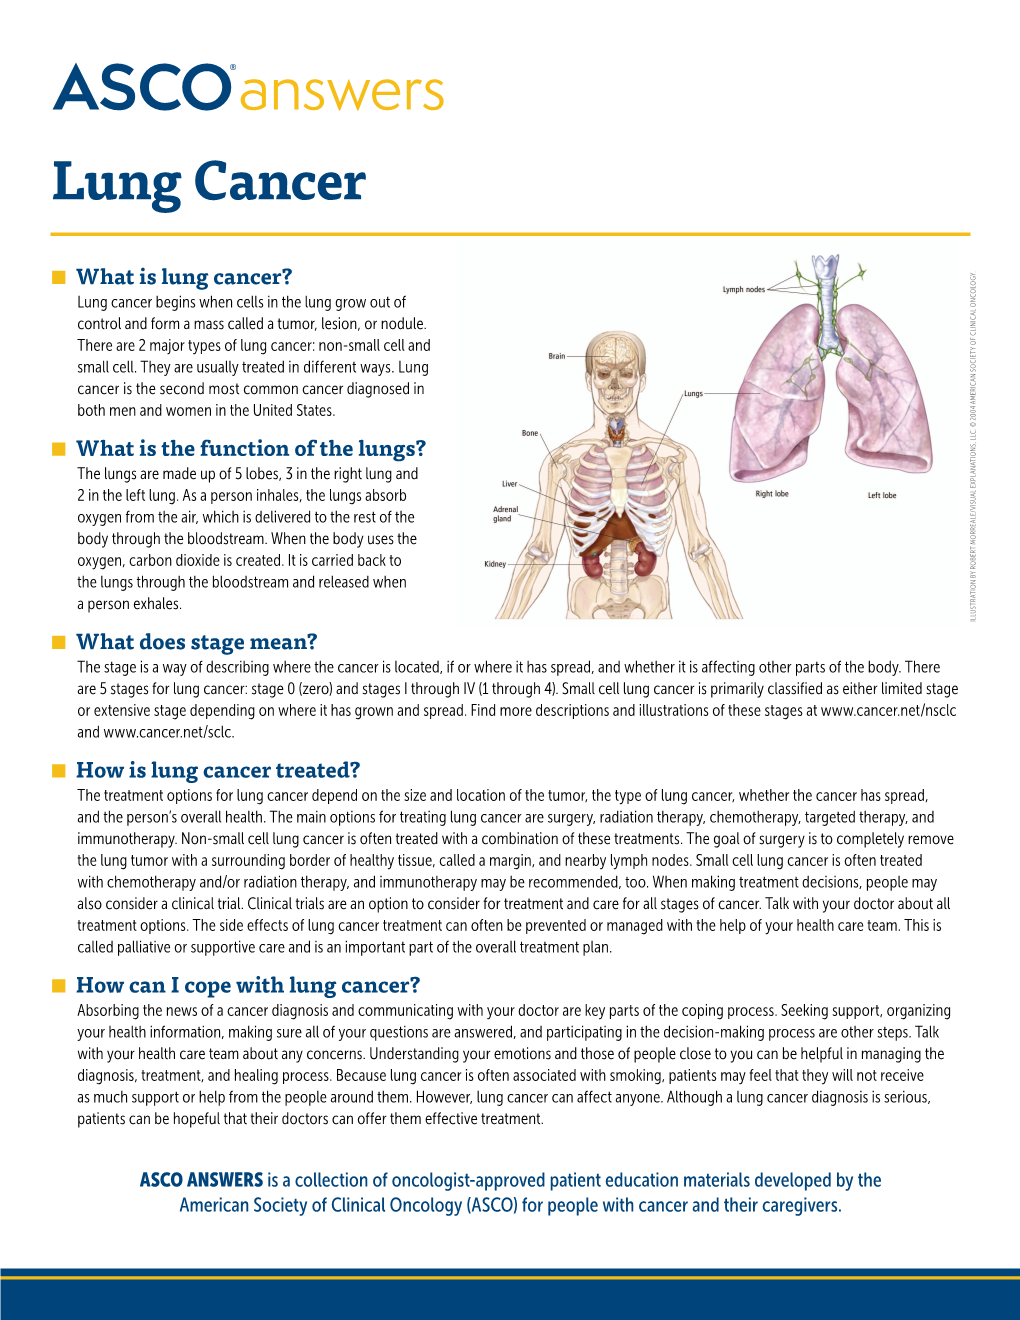 ASCO Answers: Lung Cancer